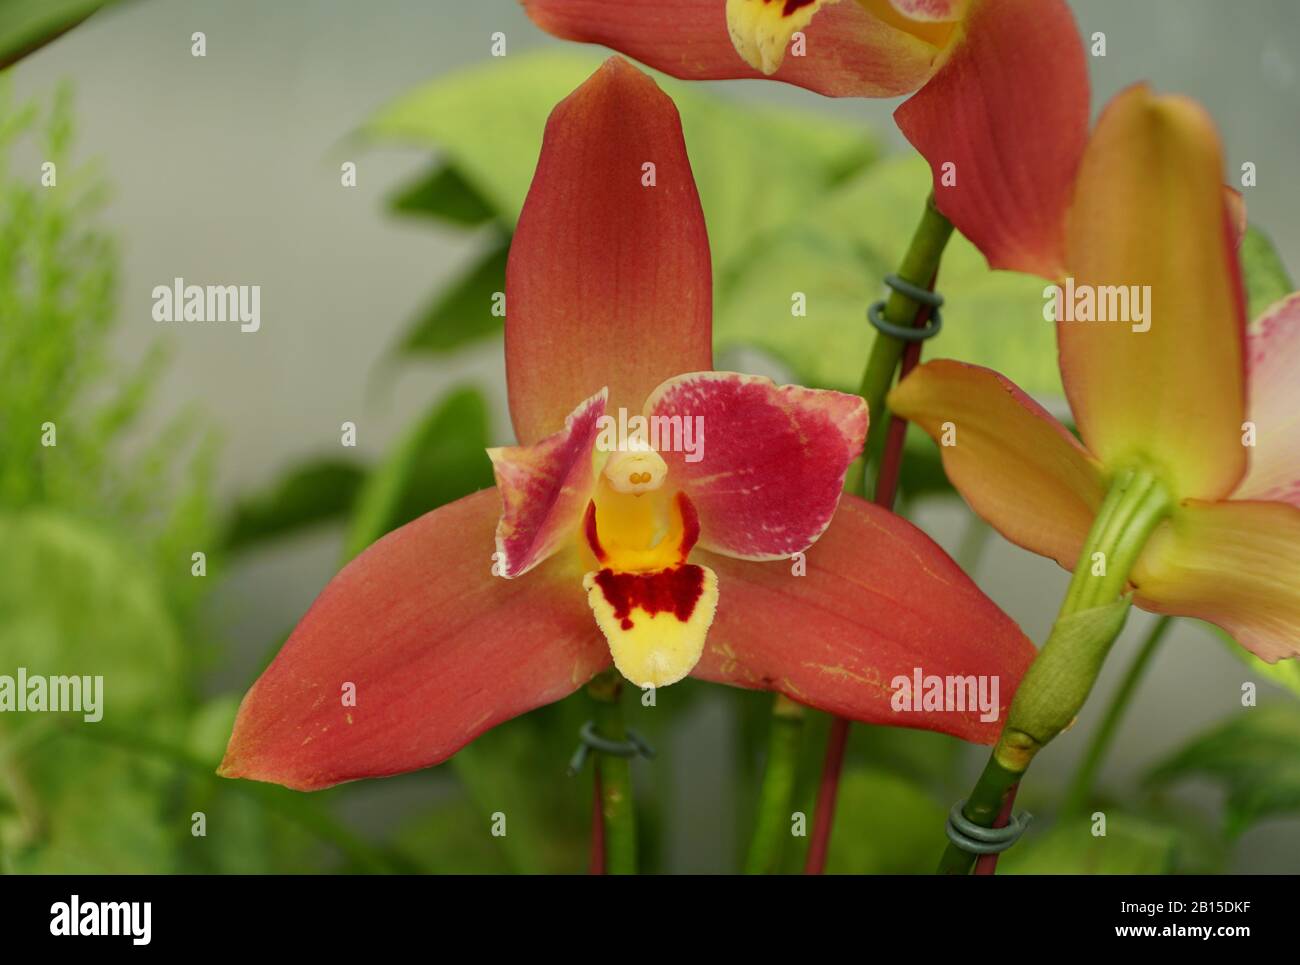 Close up of a beautiful dark red Lycaste orchid flower Stock Photo